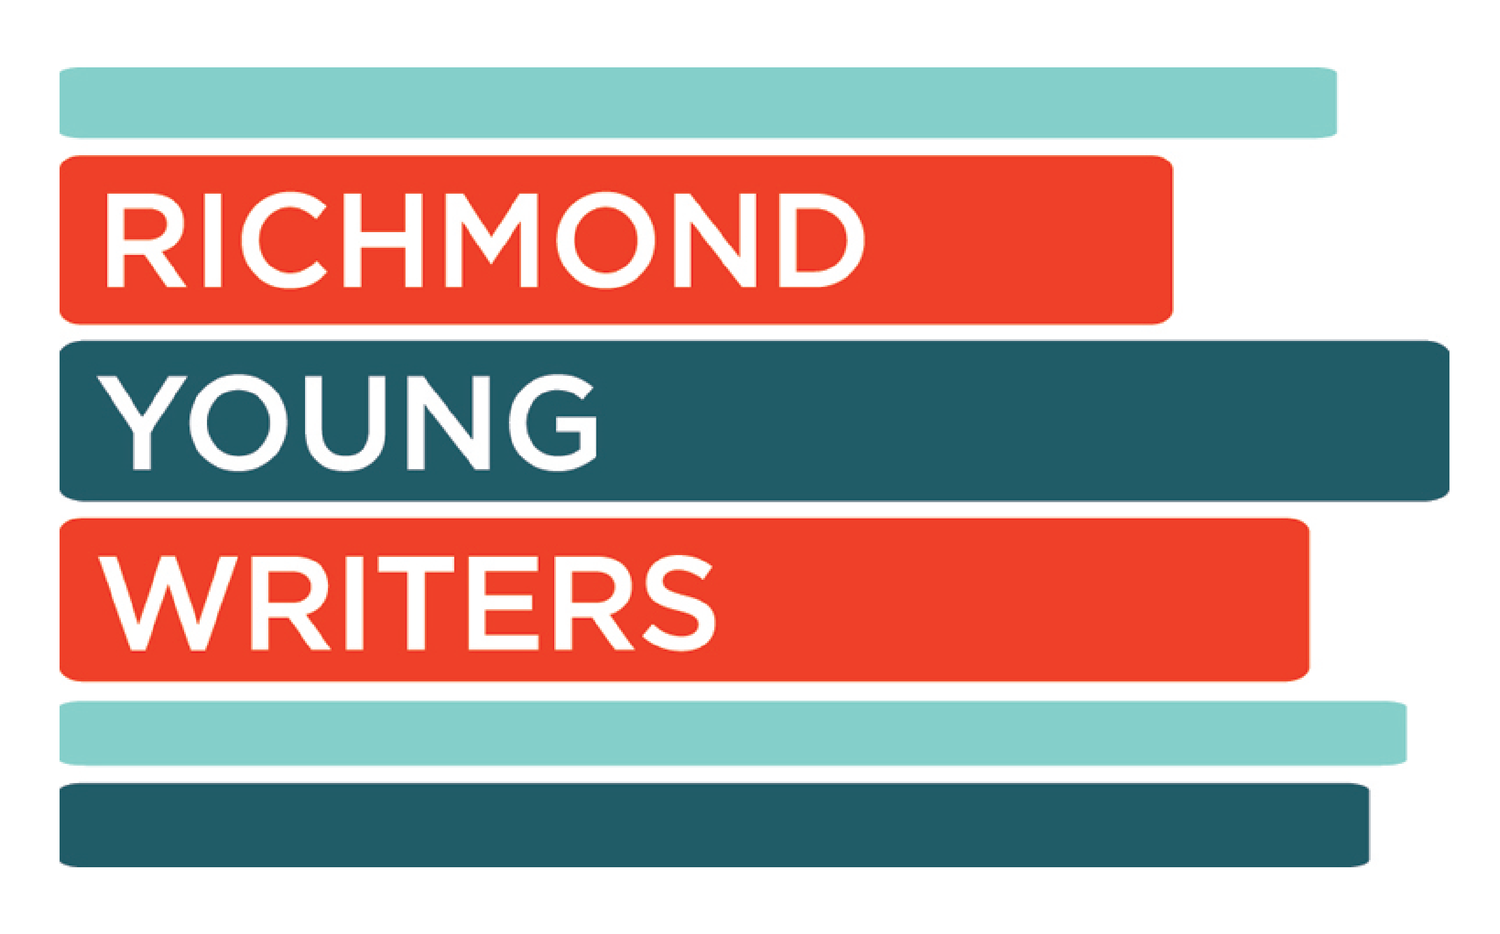 Richmond Young Writers